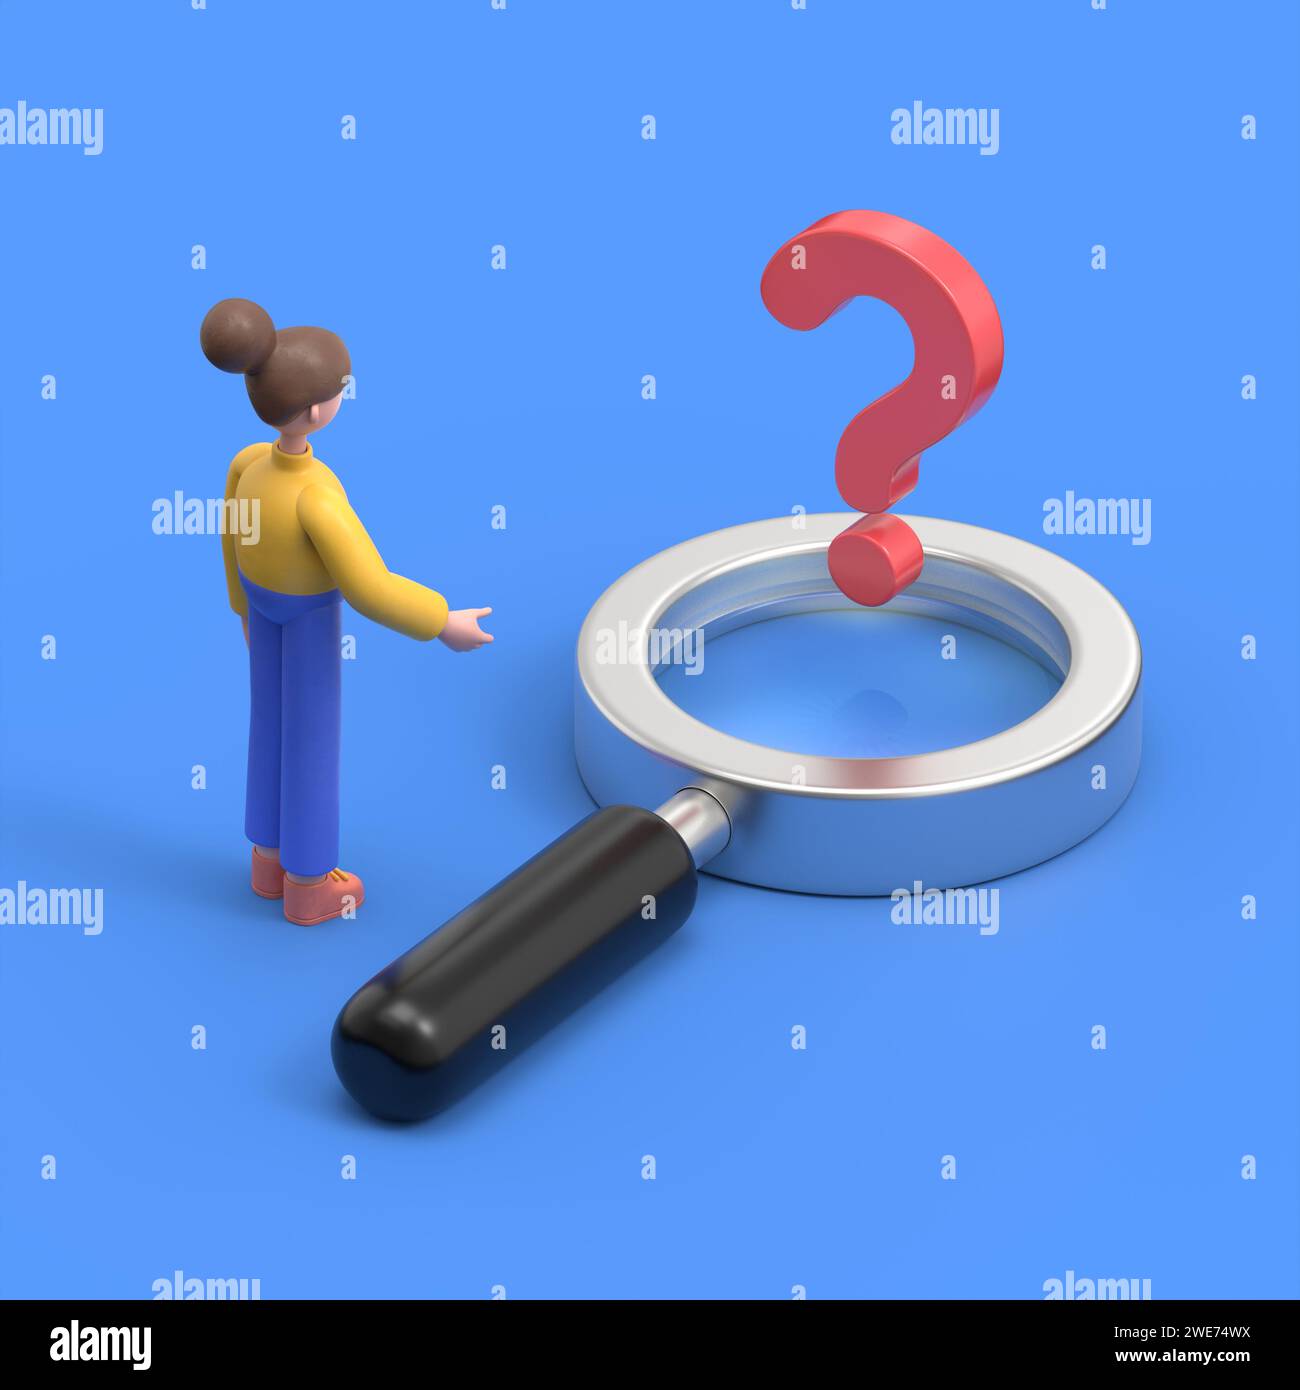 isometric 3D illustration on a blue background,3D illustration of Asian woman Angela stands in front of a question mark in a magnifying glass, looking Stock Photo